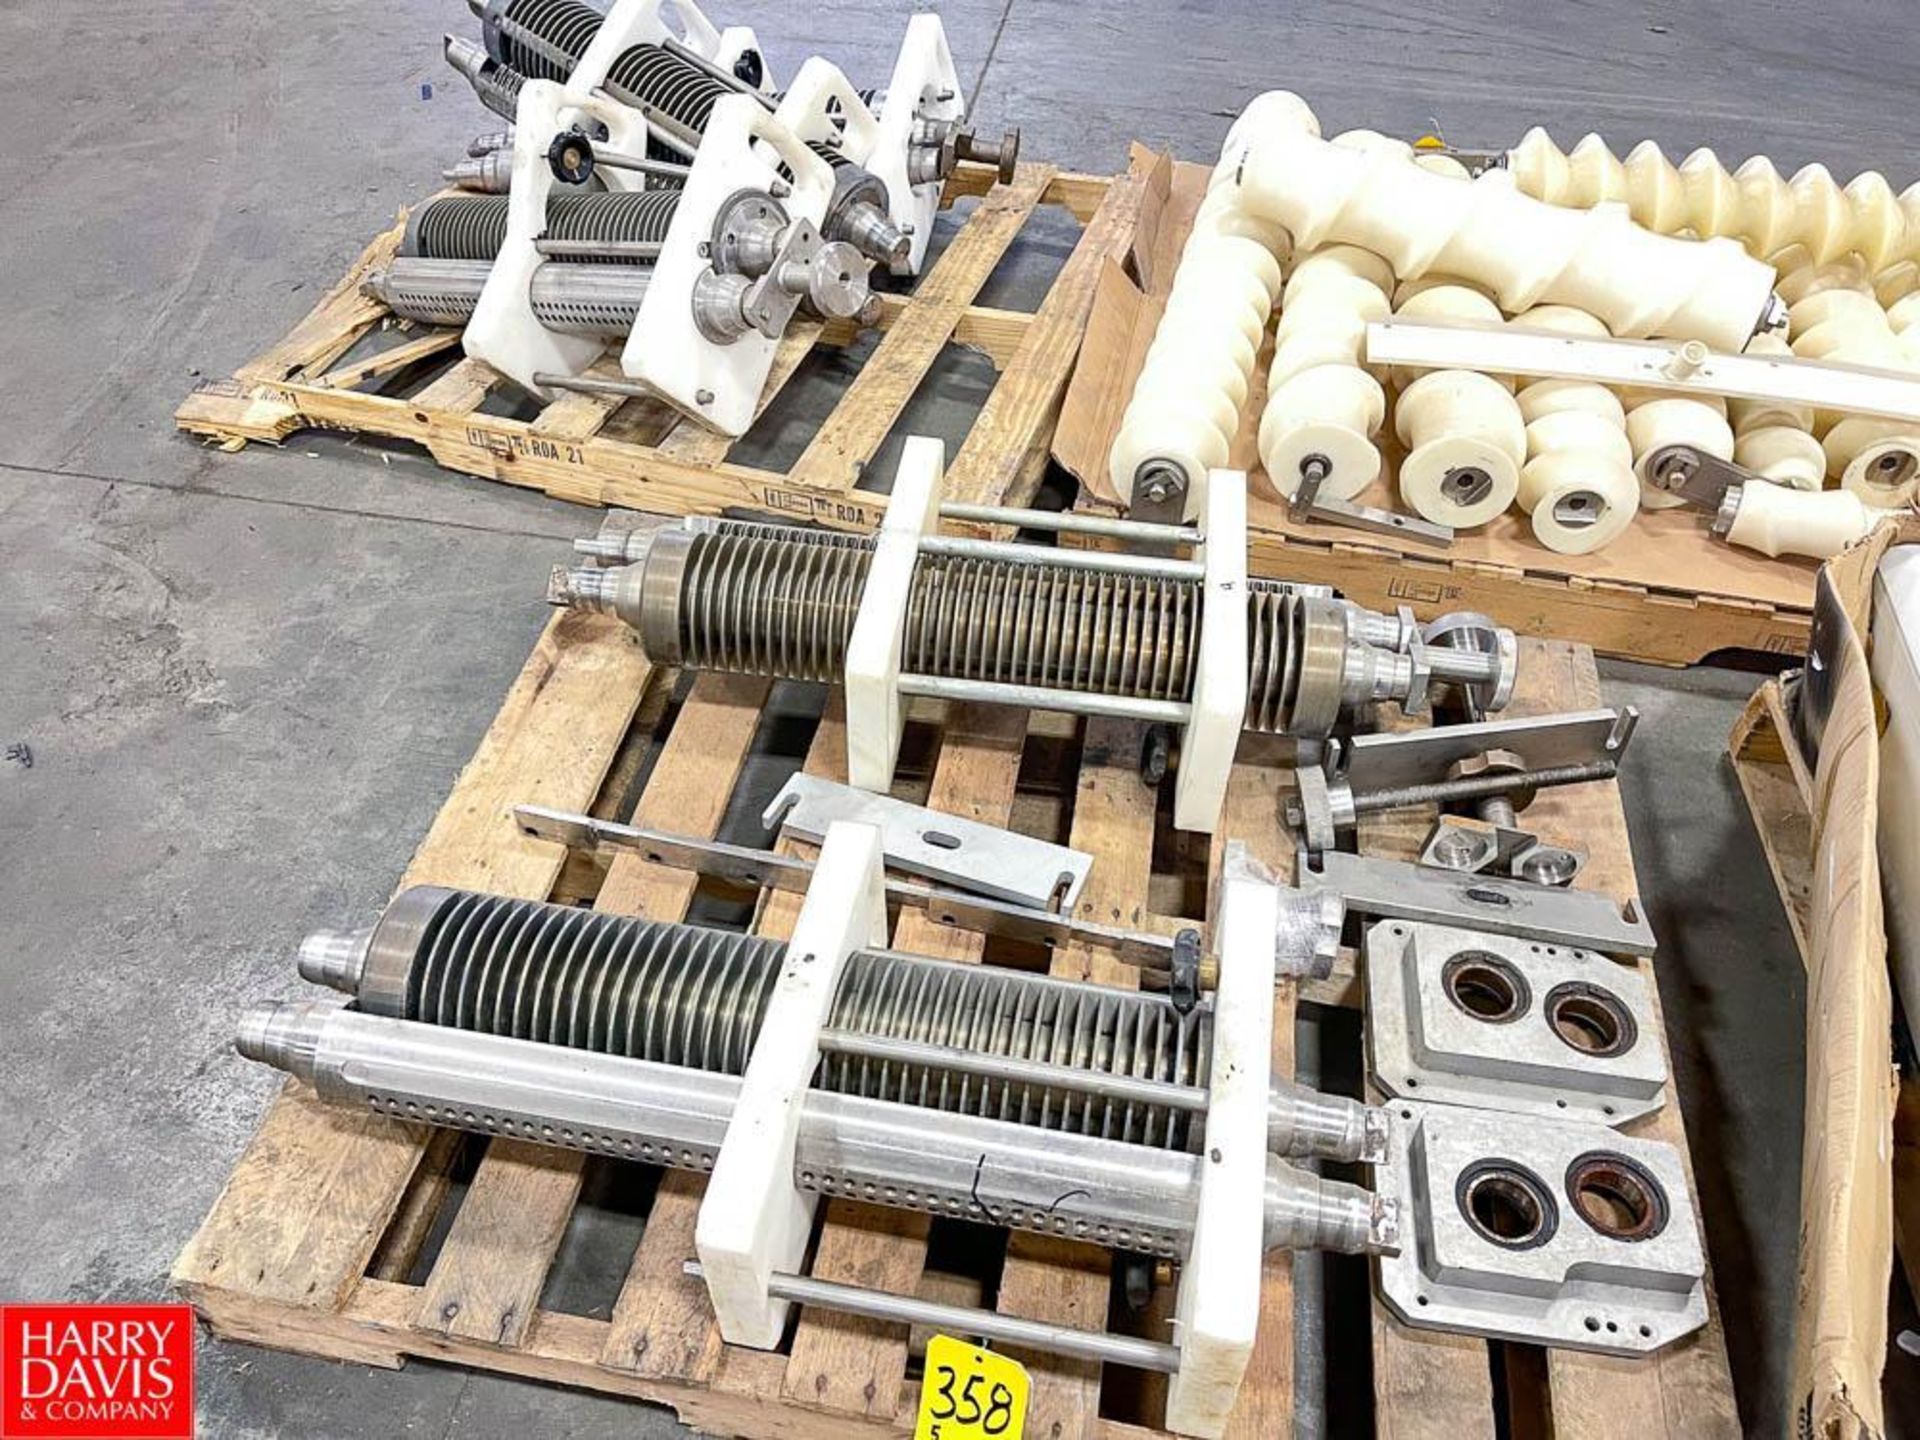 Extruder Heads - Rigging Fee= $75